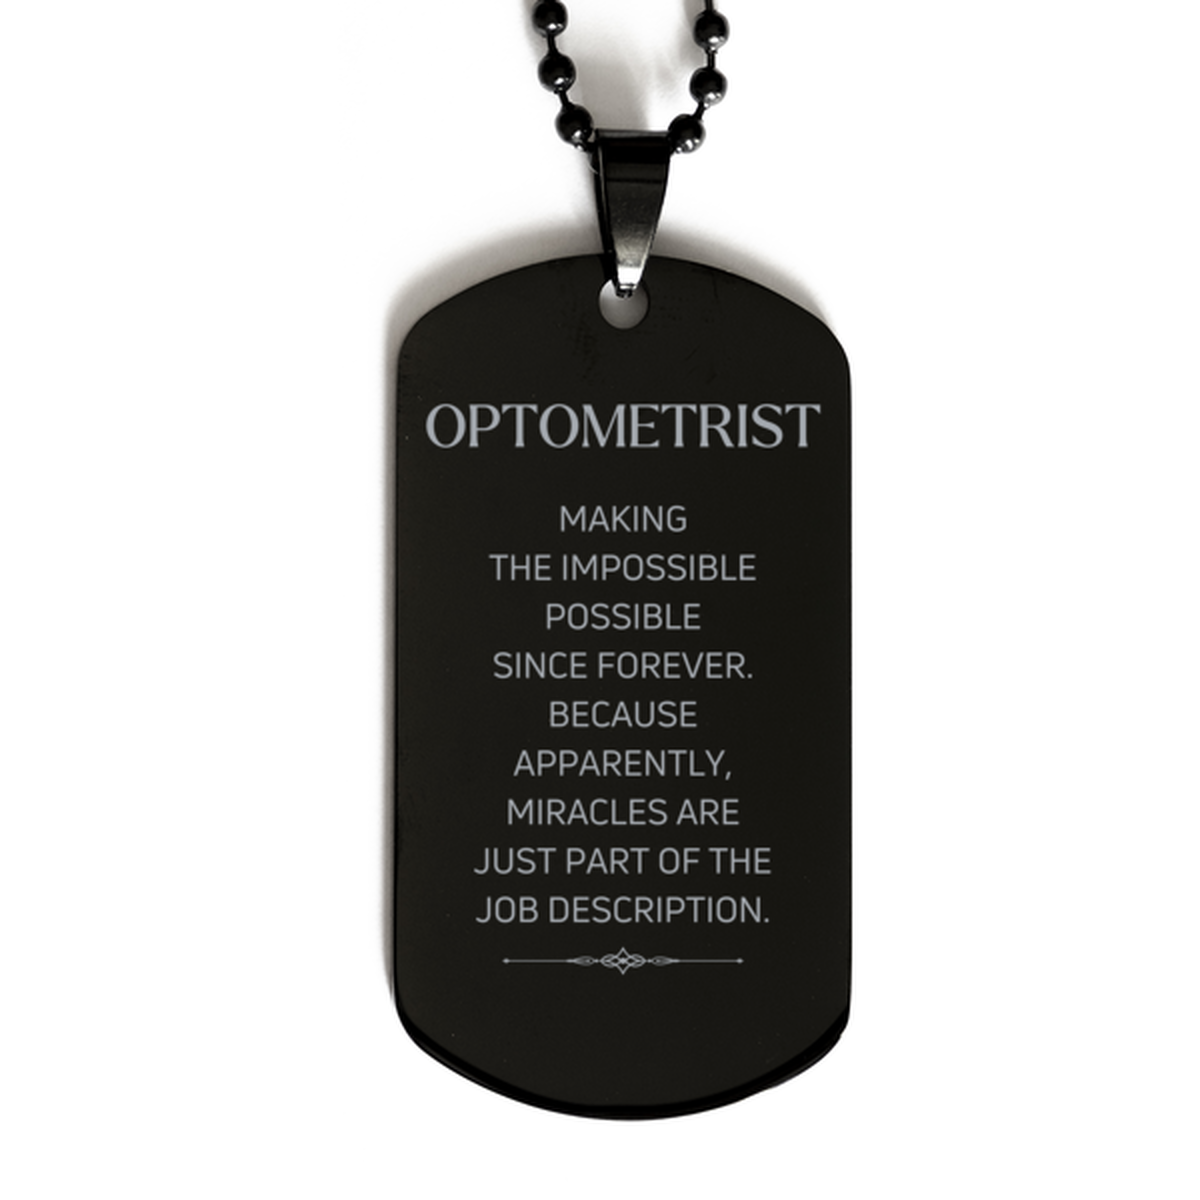 Funny Optometrist Gifts, Miracles are just part of the job description, Inspirational Birthday Black Dog Tag For Optometrist, Men, Women, Coworkers, Friends, Boss